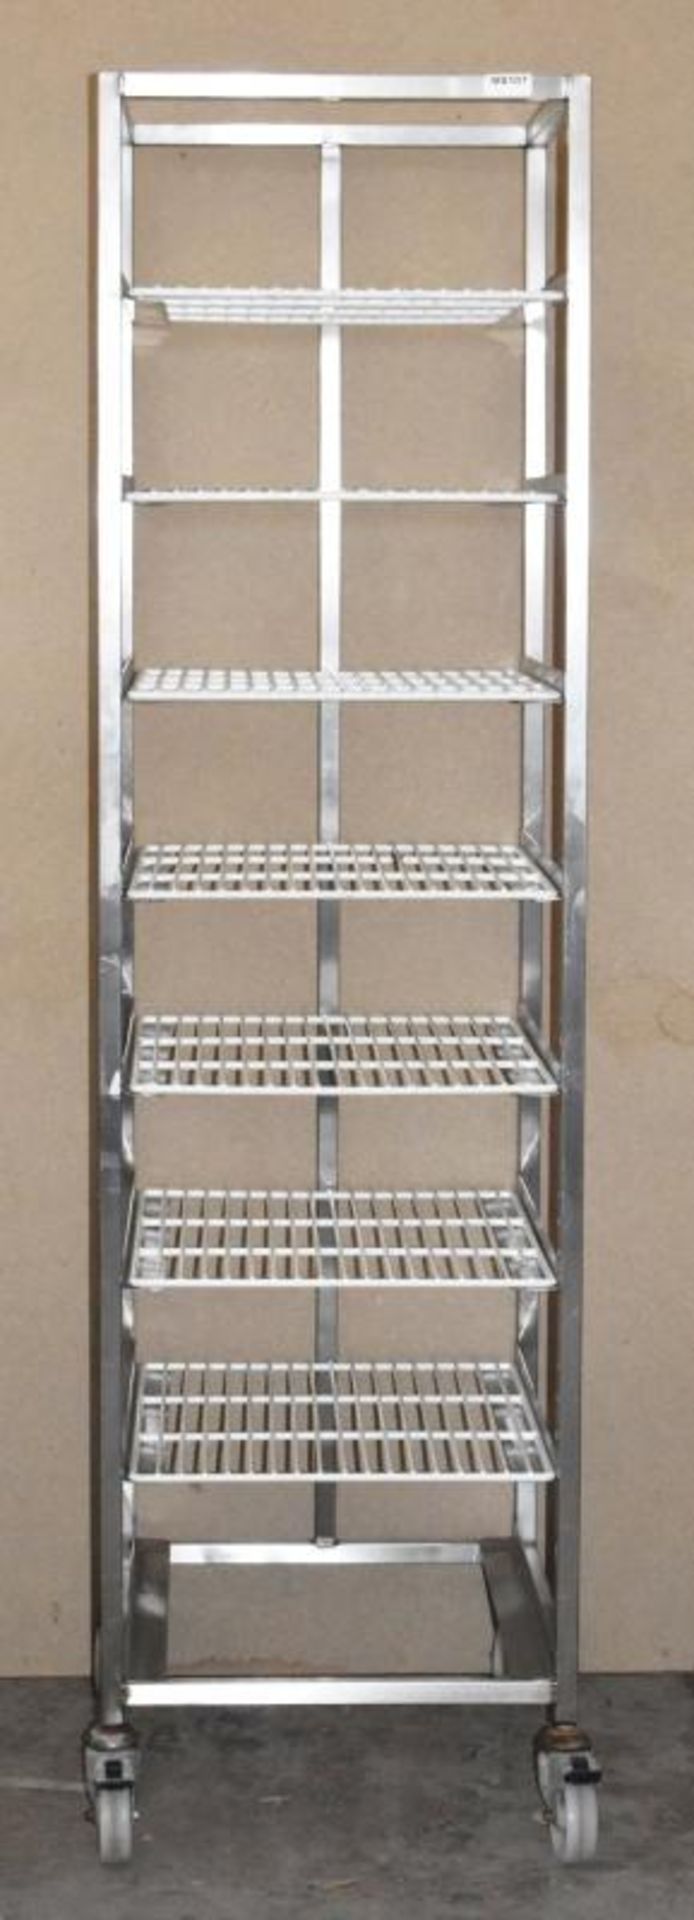 1 x Stainless Steel 8 Tier Mobile Shelf Unit For Commercial Kitchens With White Coated Wire Shelves - Image 11 of 11